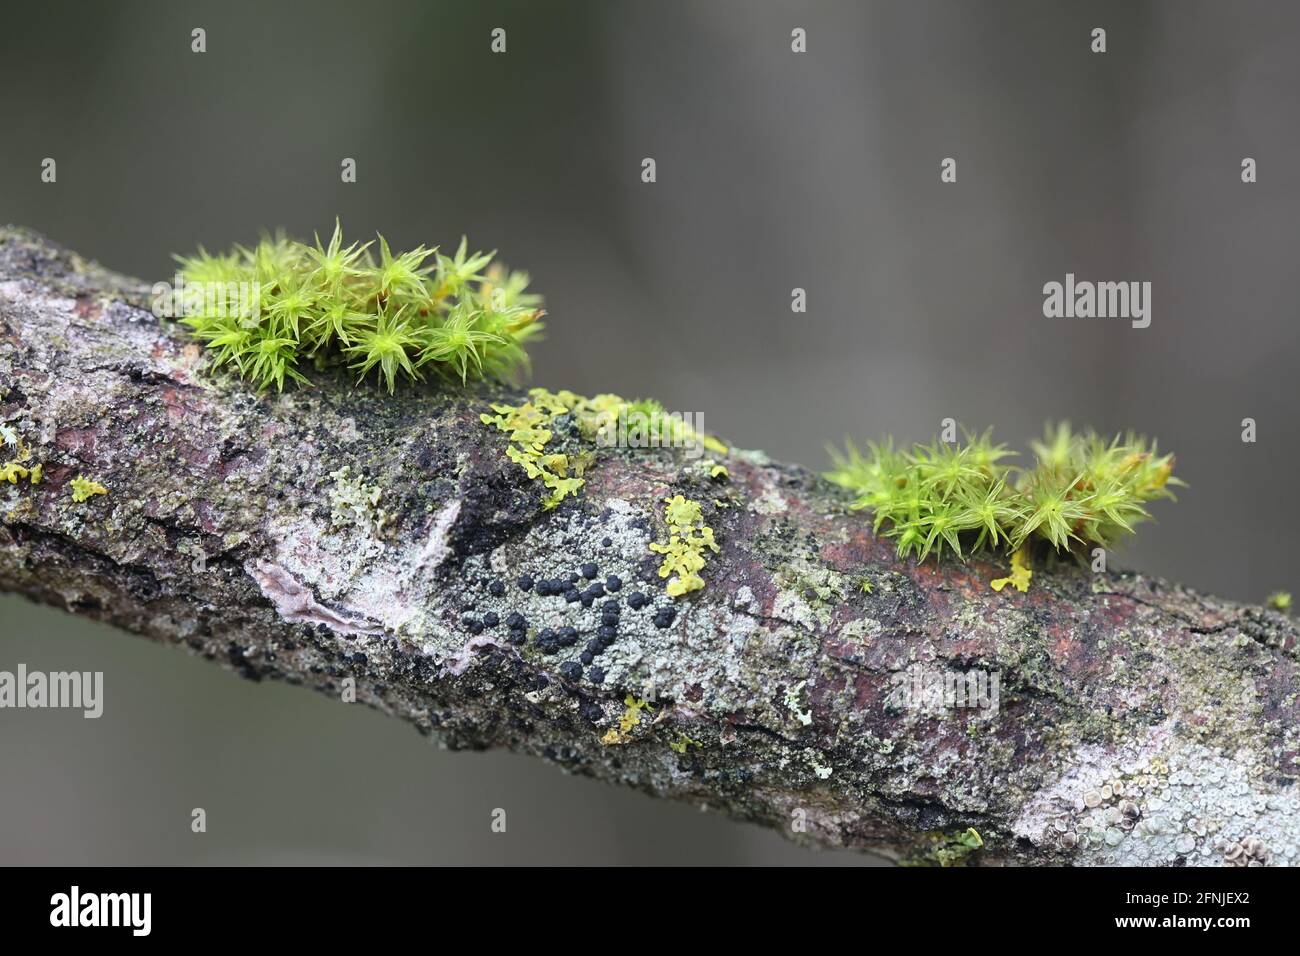 Lewinskya speciosa, also called Orthotrichum speciosum, a bristle-moss from Finland with no common English name Stock Photo